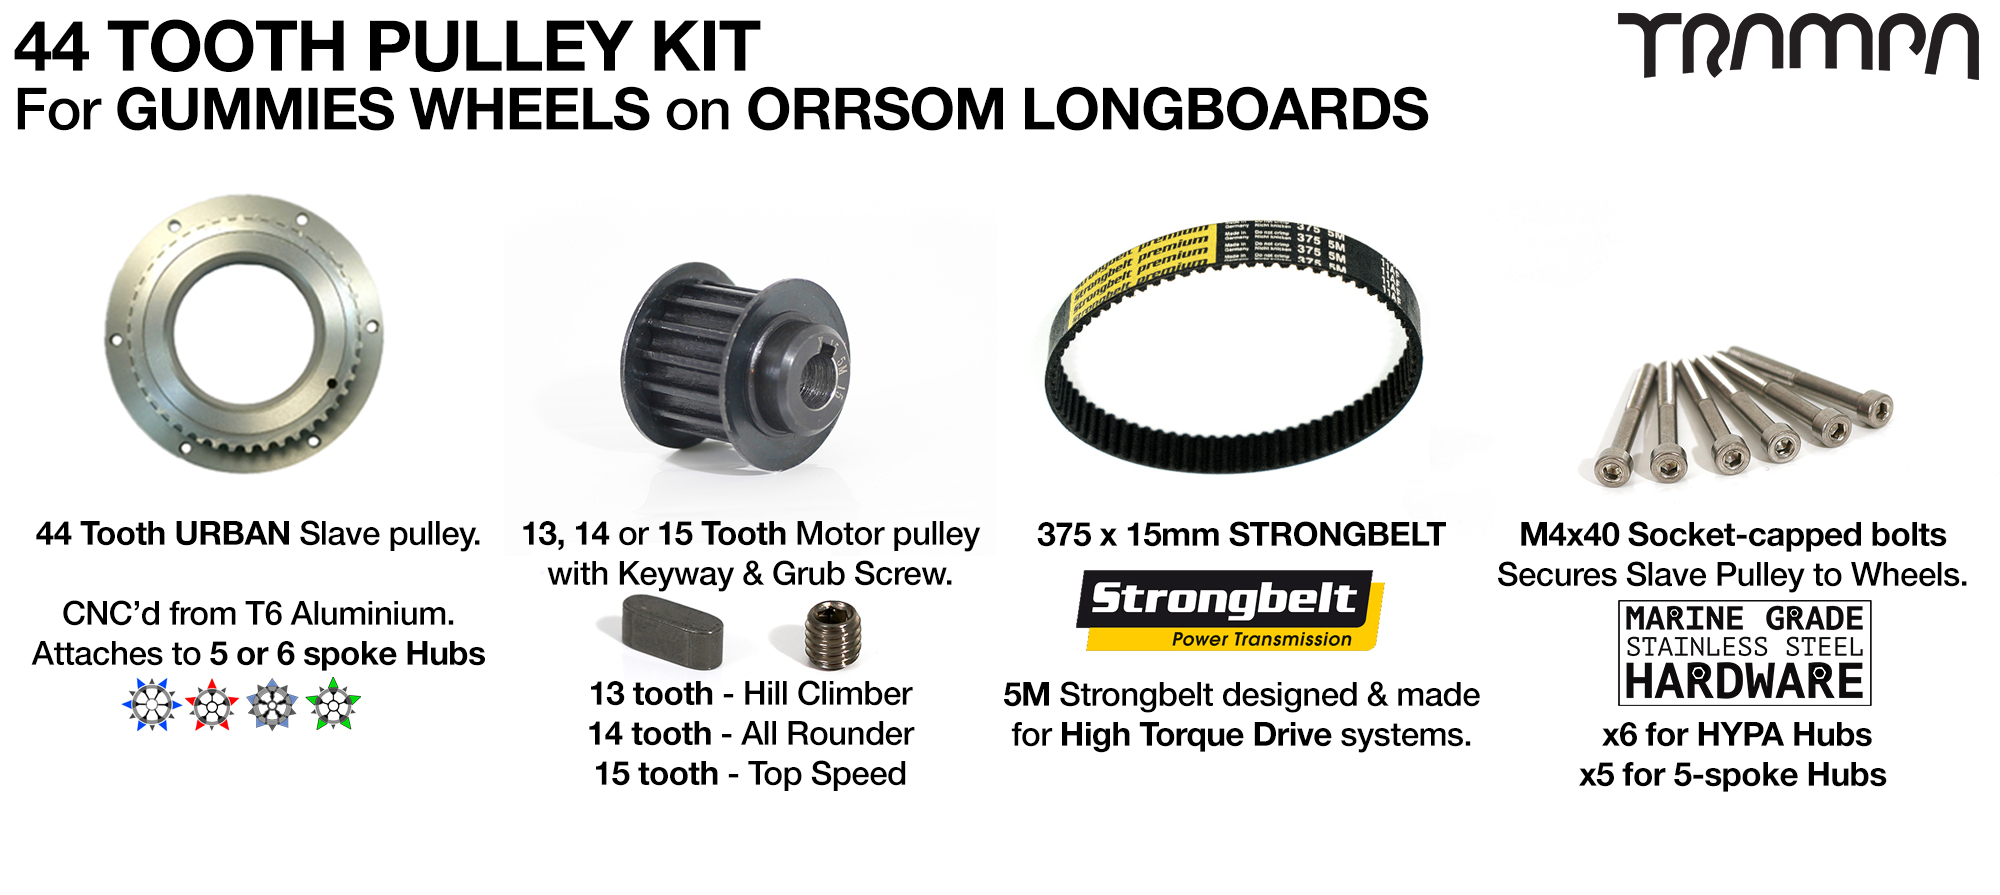 12FiFties ORRSOM Longboard 44 Tooth Pulley kit with 375x15mm Belt - to Fit GUMMIES Wheels